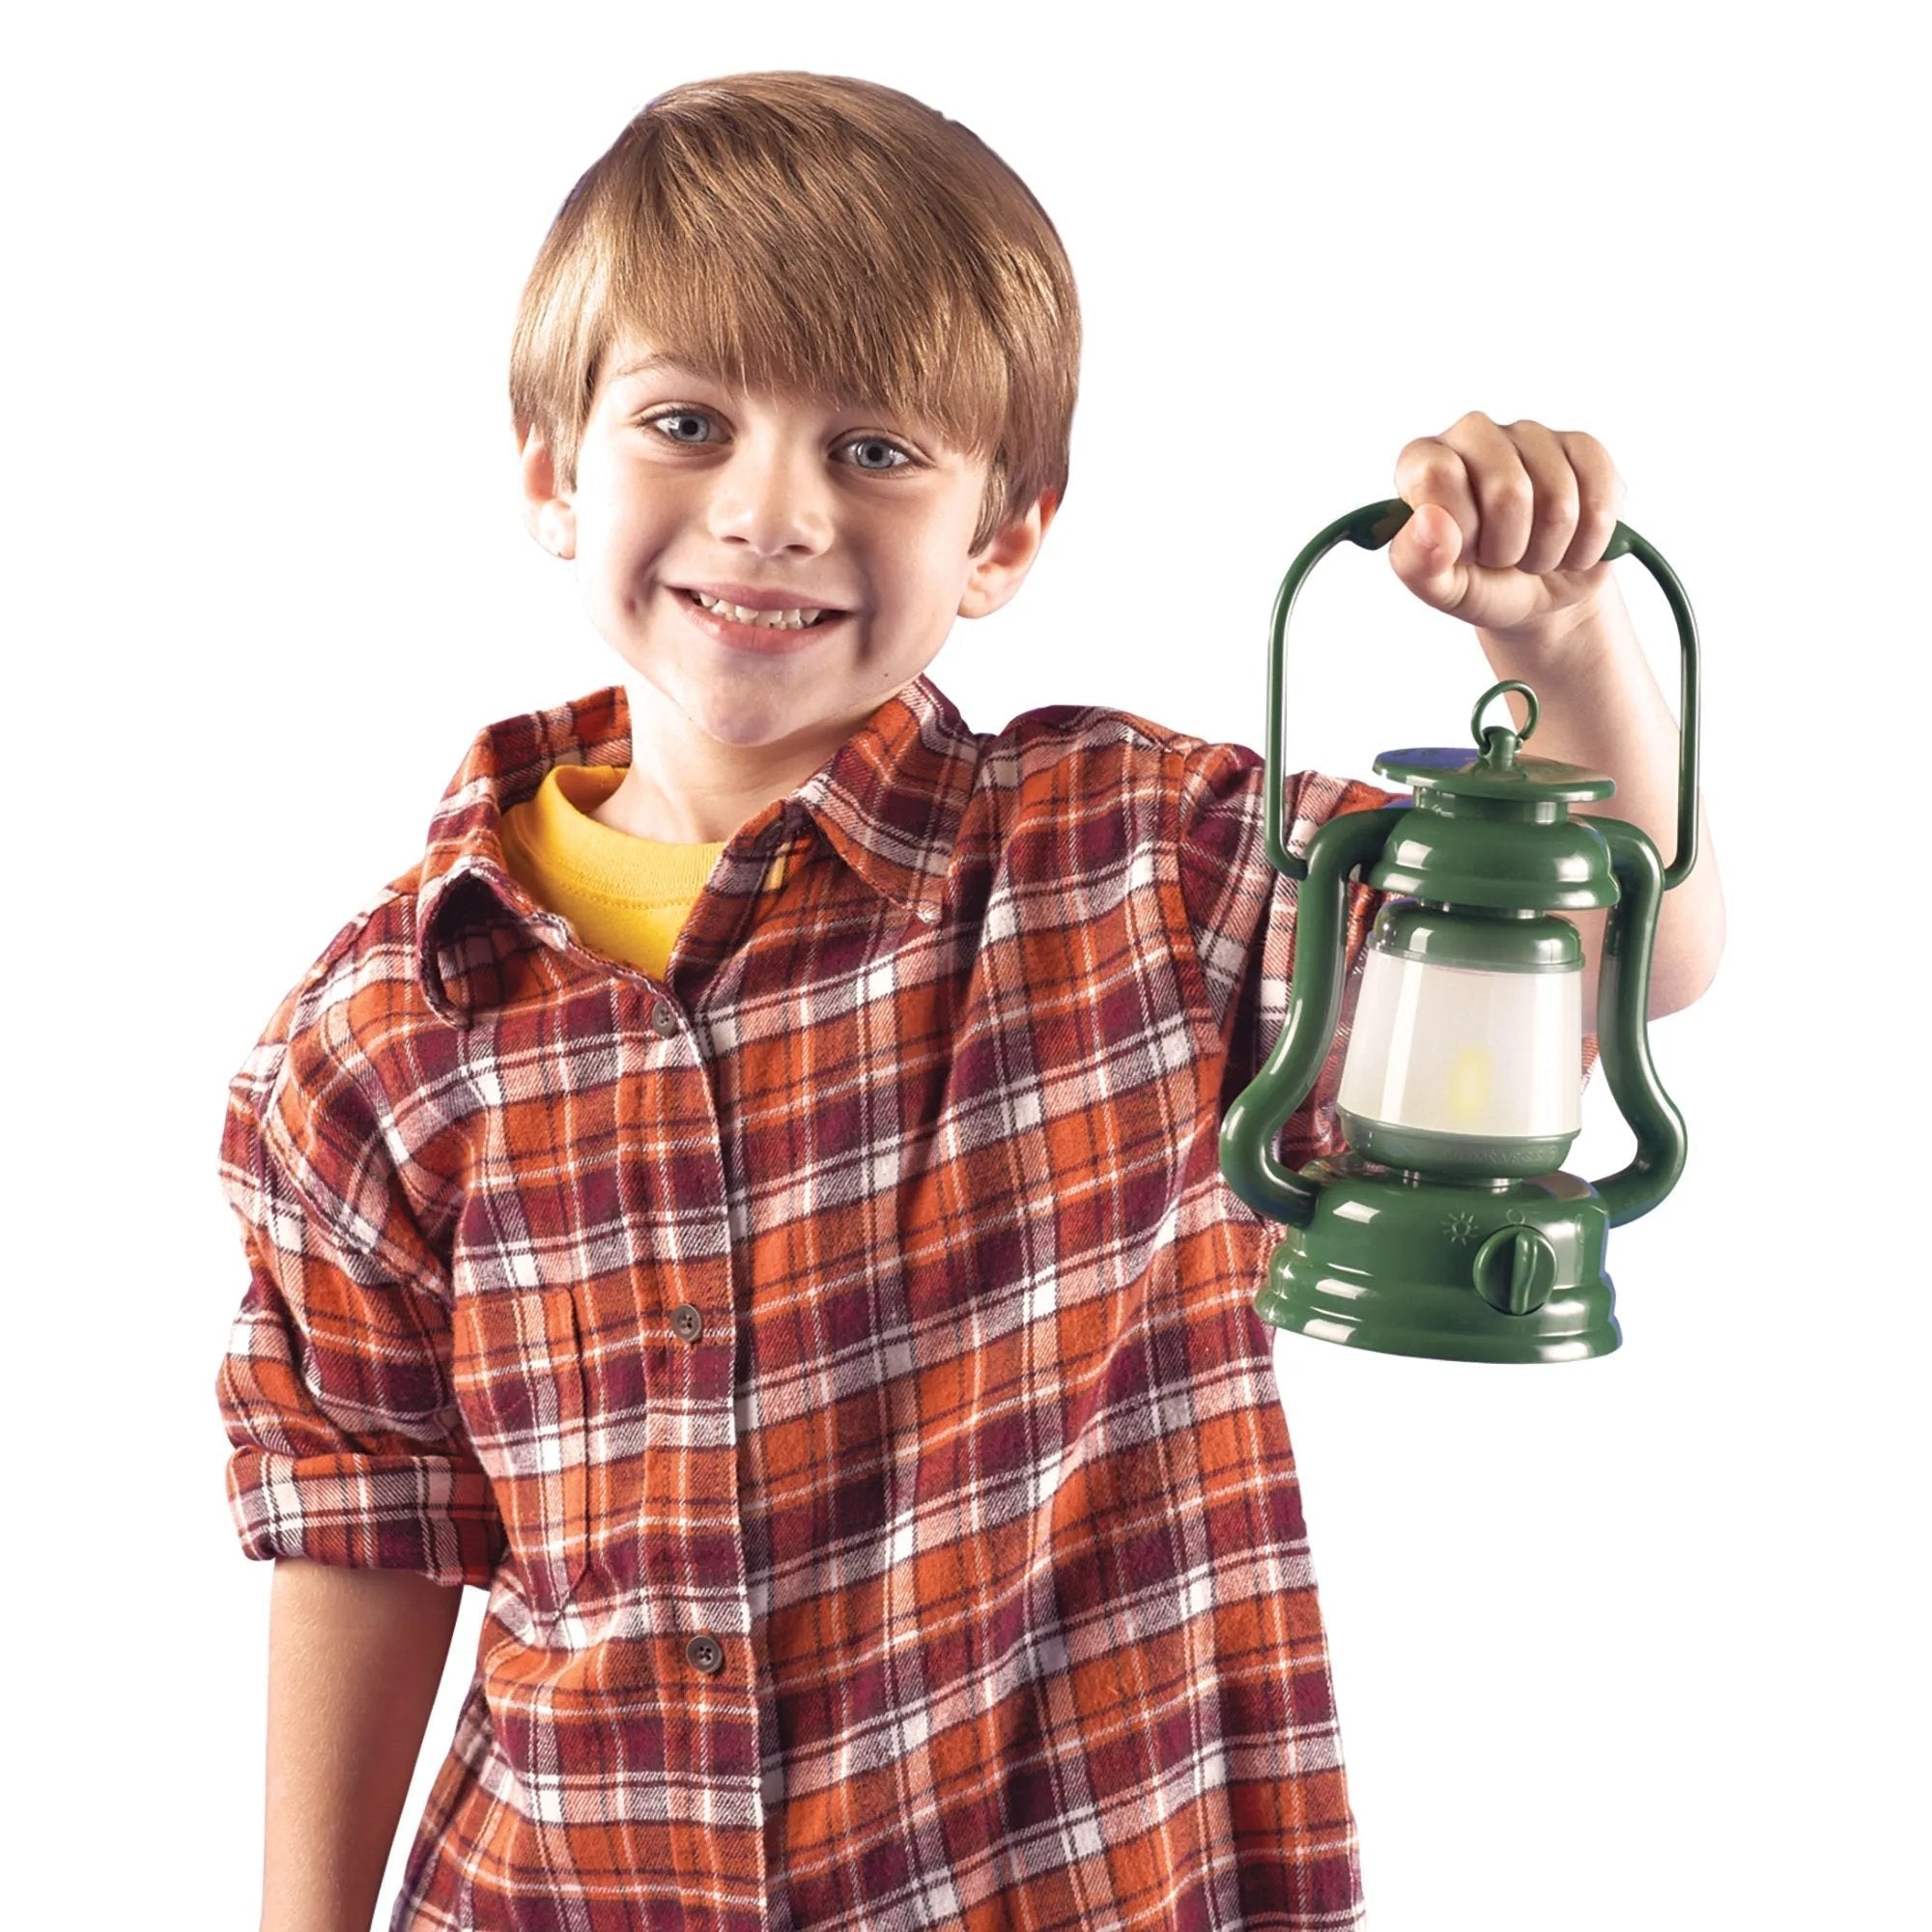 Pretend & Play® Camp Set, Get ready for a thrilling camping adventure with the Pretend & Play® Camp Set! This comprehensive set contains everything children need to ignite their imaginative play and learn valuable skills.With 9 exciting pieces, children can set up their own pretend campsite anywhere they desire. The highlight of the set is the unique light-up lantern and stove. These realistic features require 2 AA batteries (not included) and add an extra layer of authenticity to the camping experience. Ch